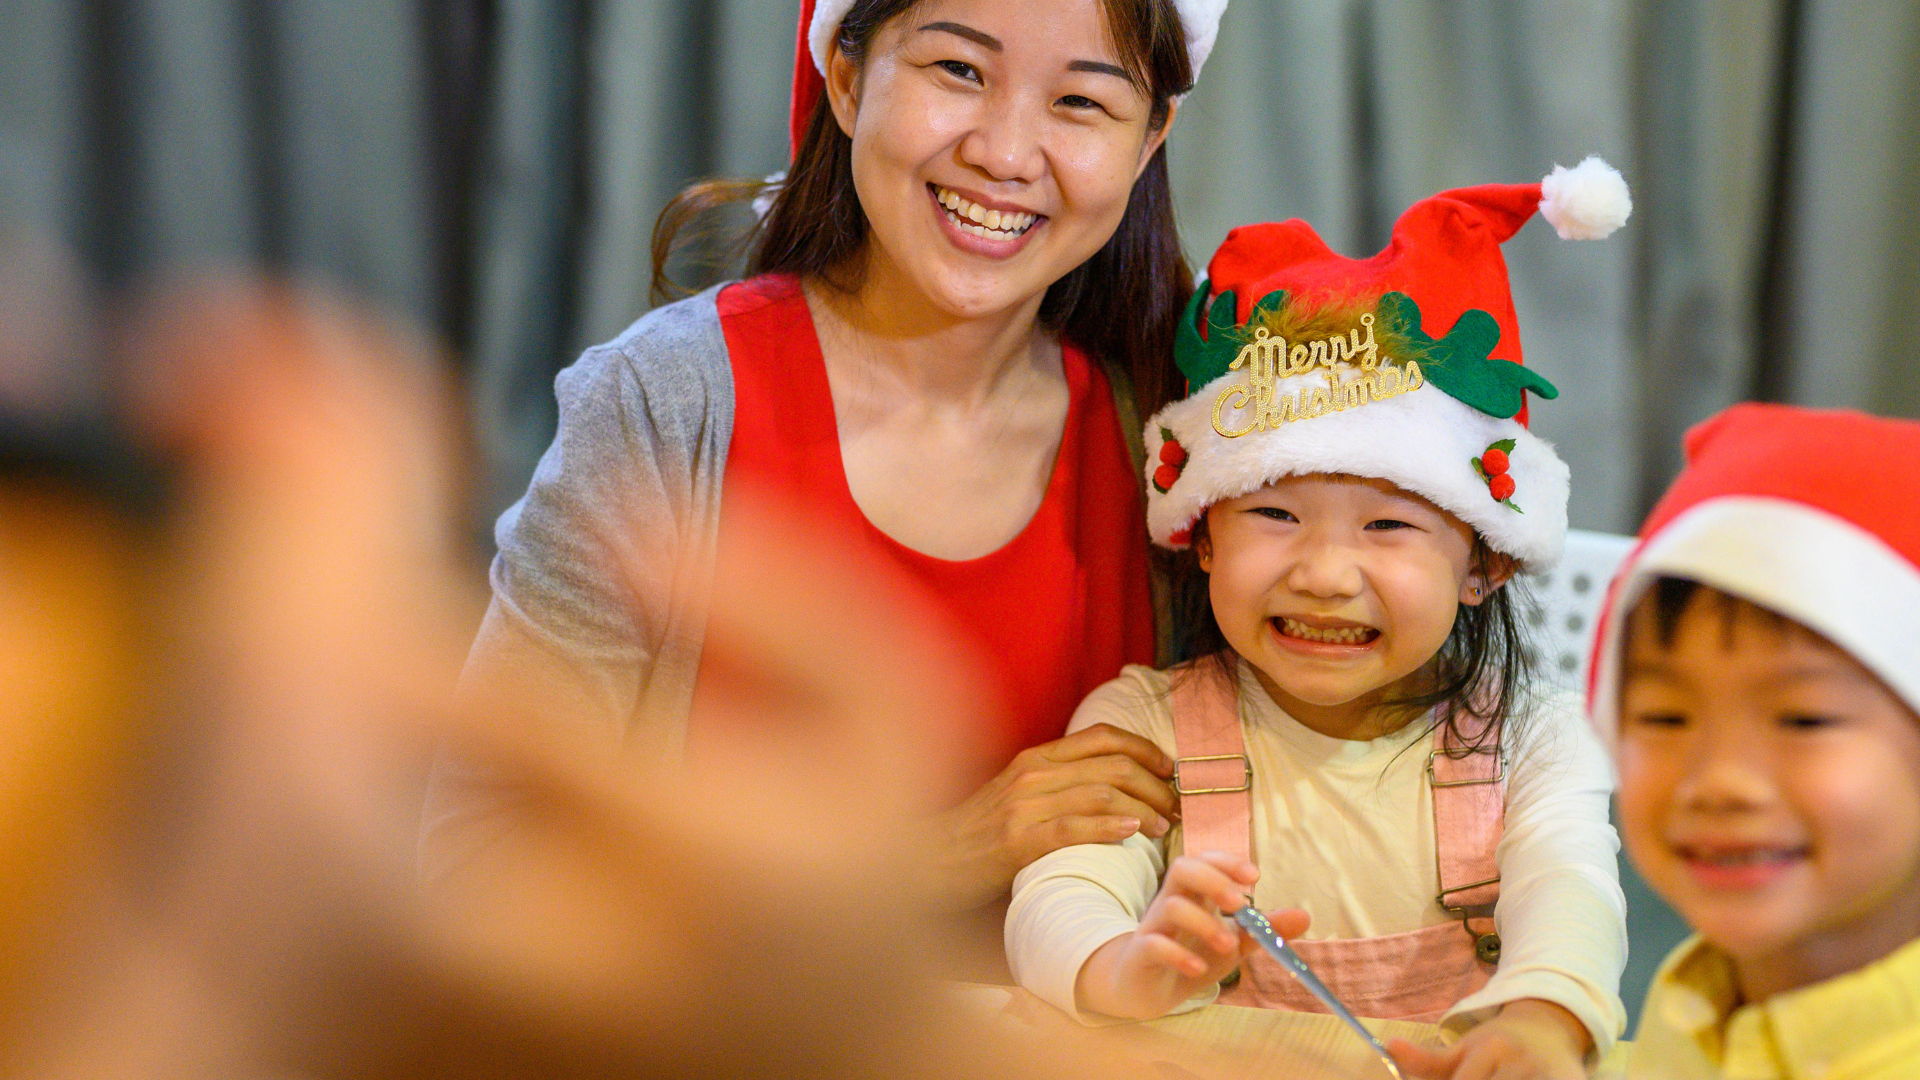 Must-Try Activities for This Christmas with Your Family